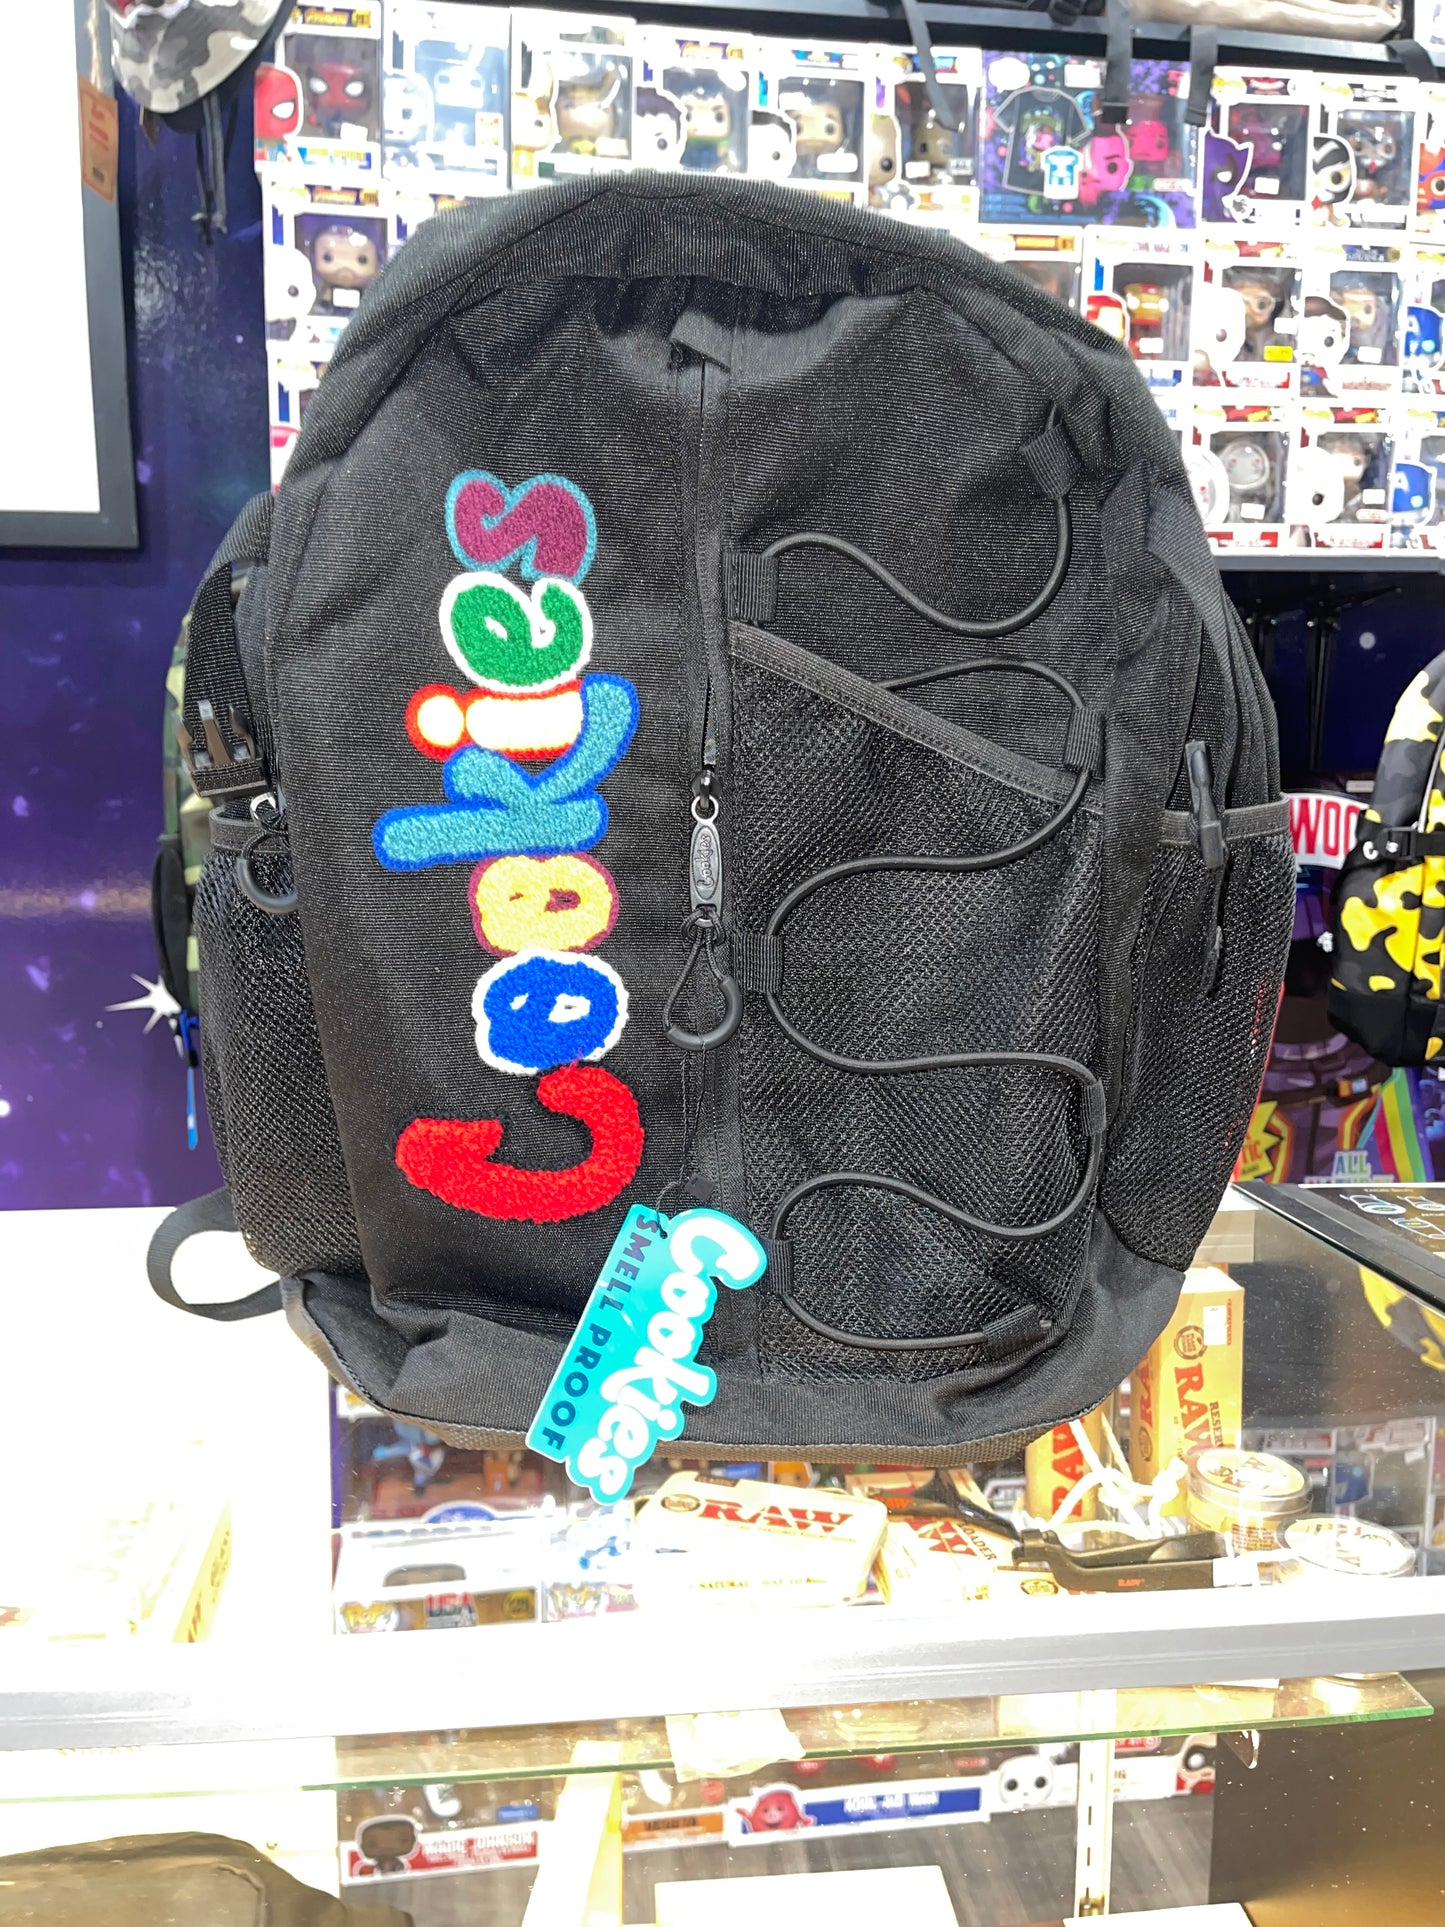 Cookies SF "The Bungee" smell proof backpack